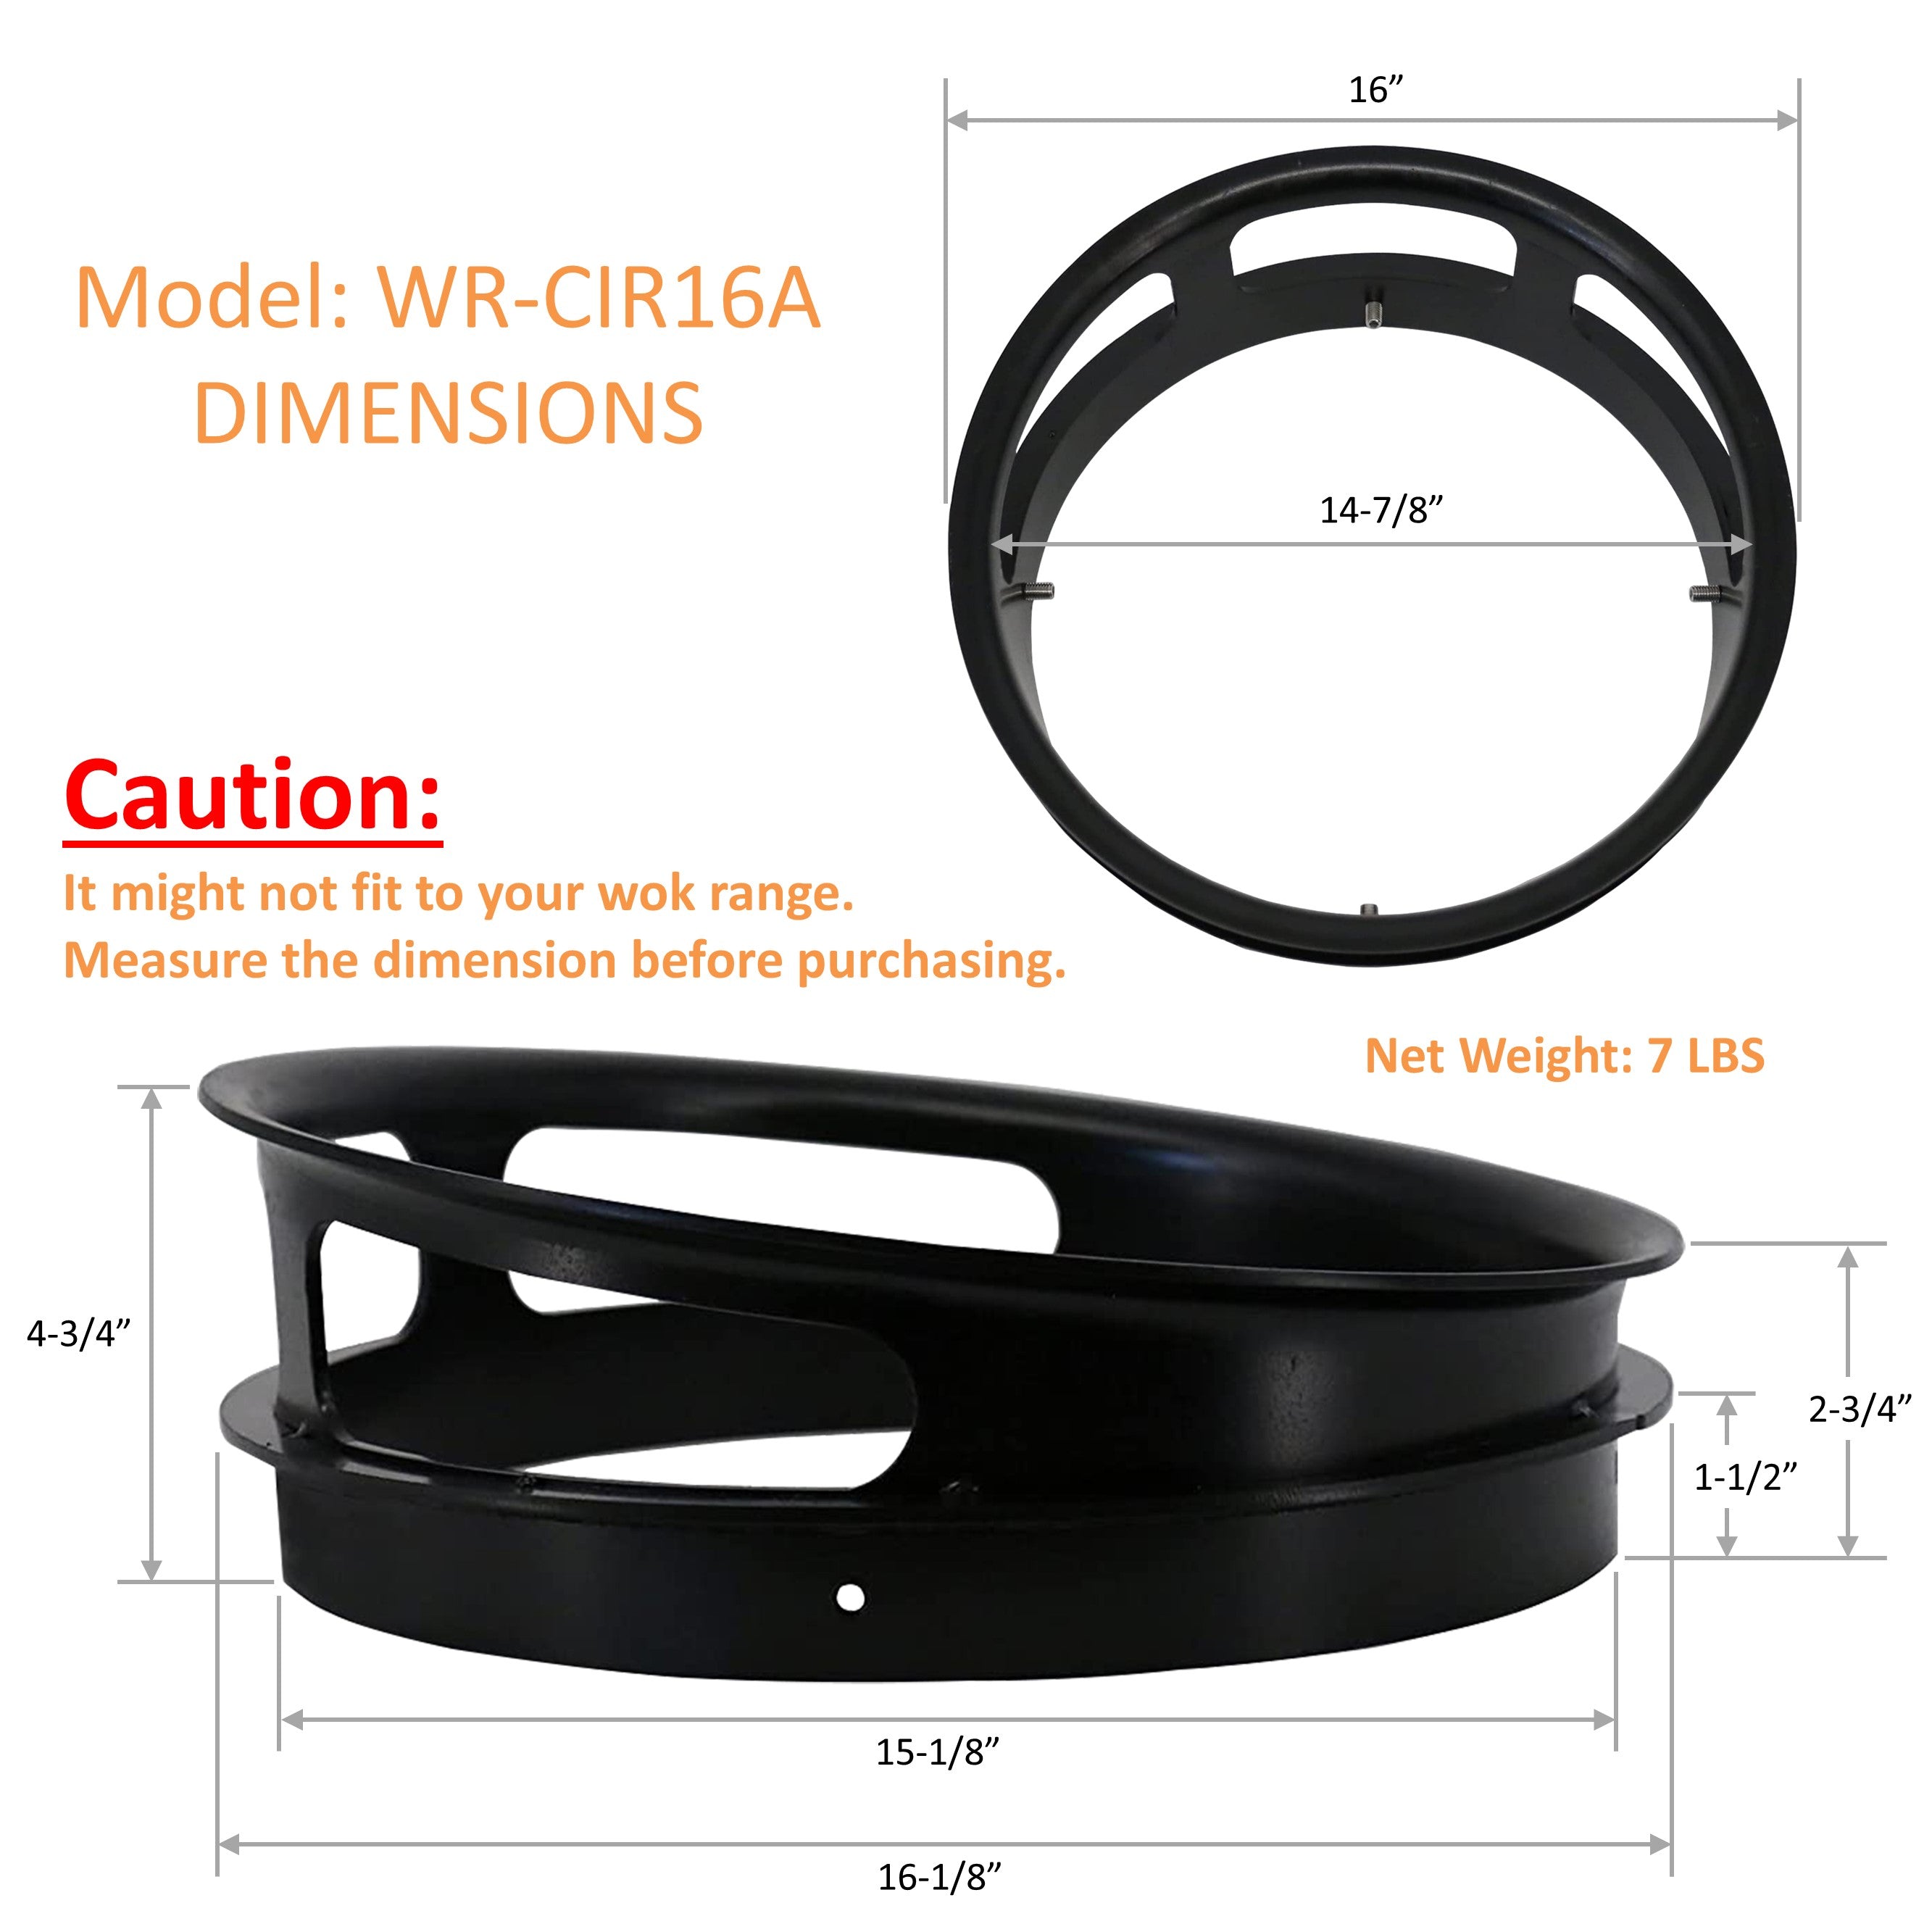 Leyso 16” Diameter 3 Opening Steel Rim to Replace the Worn Out Wok Ring for Chinese Wok Range